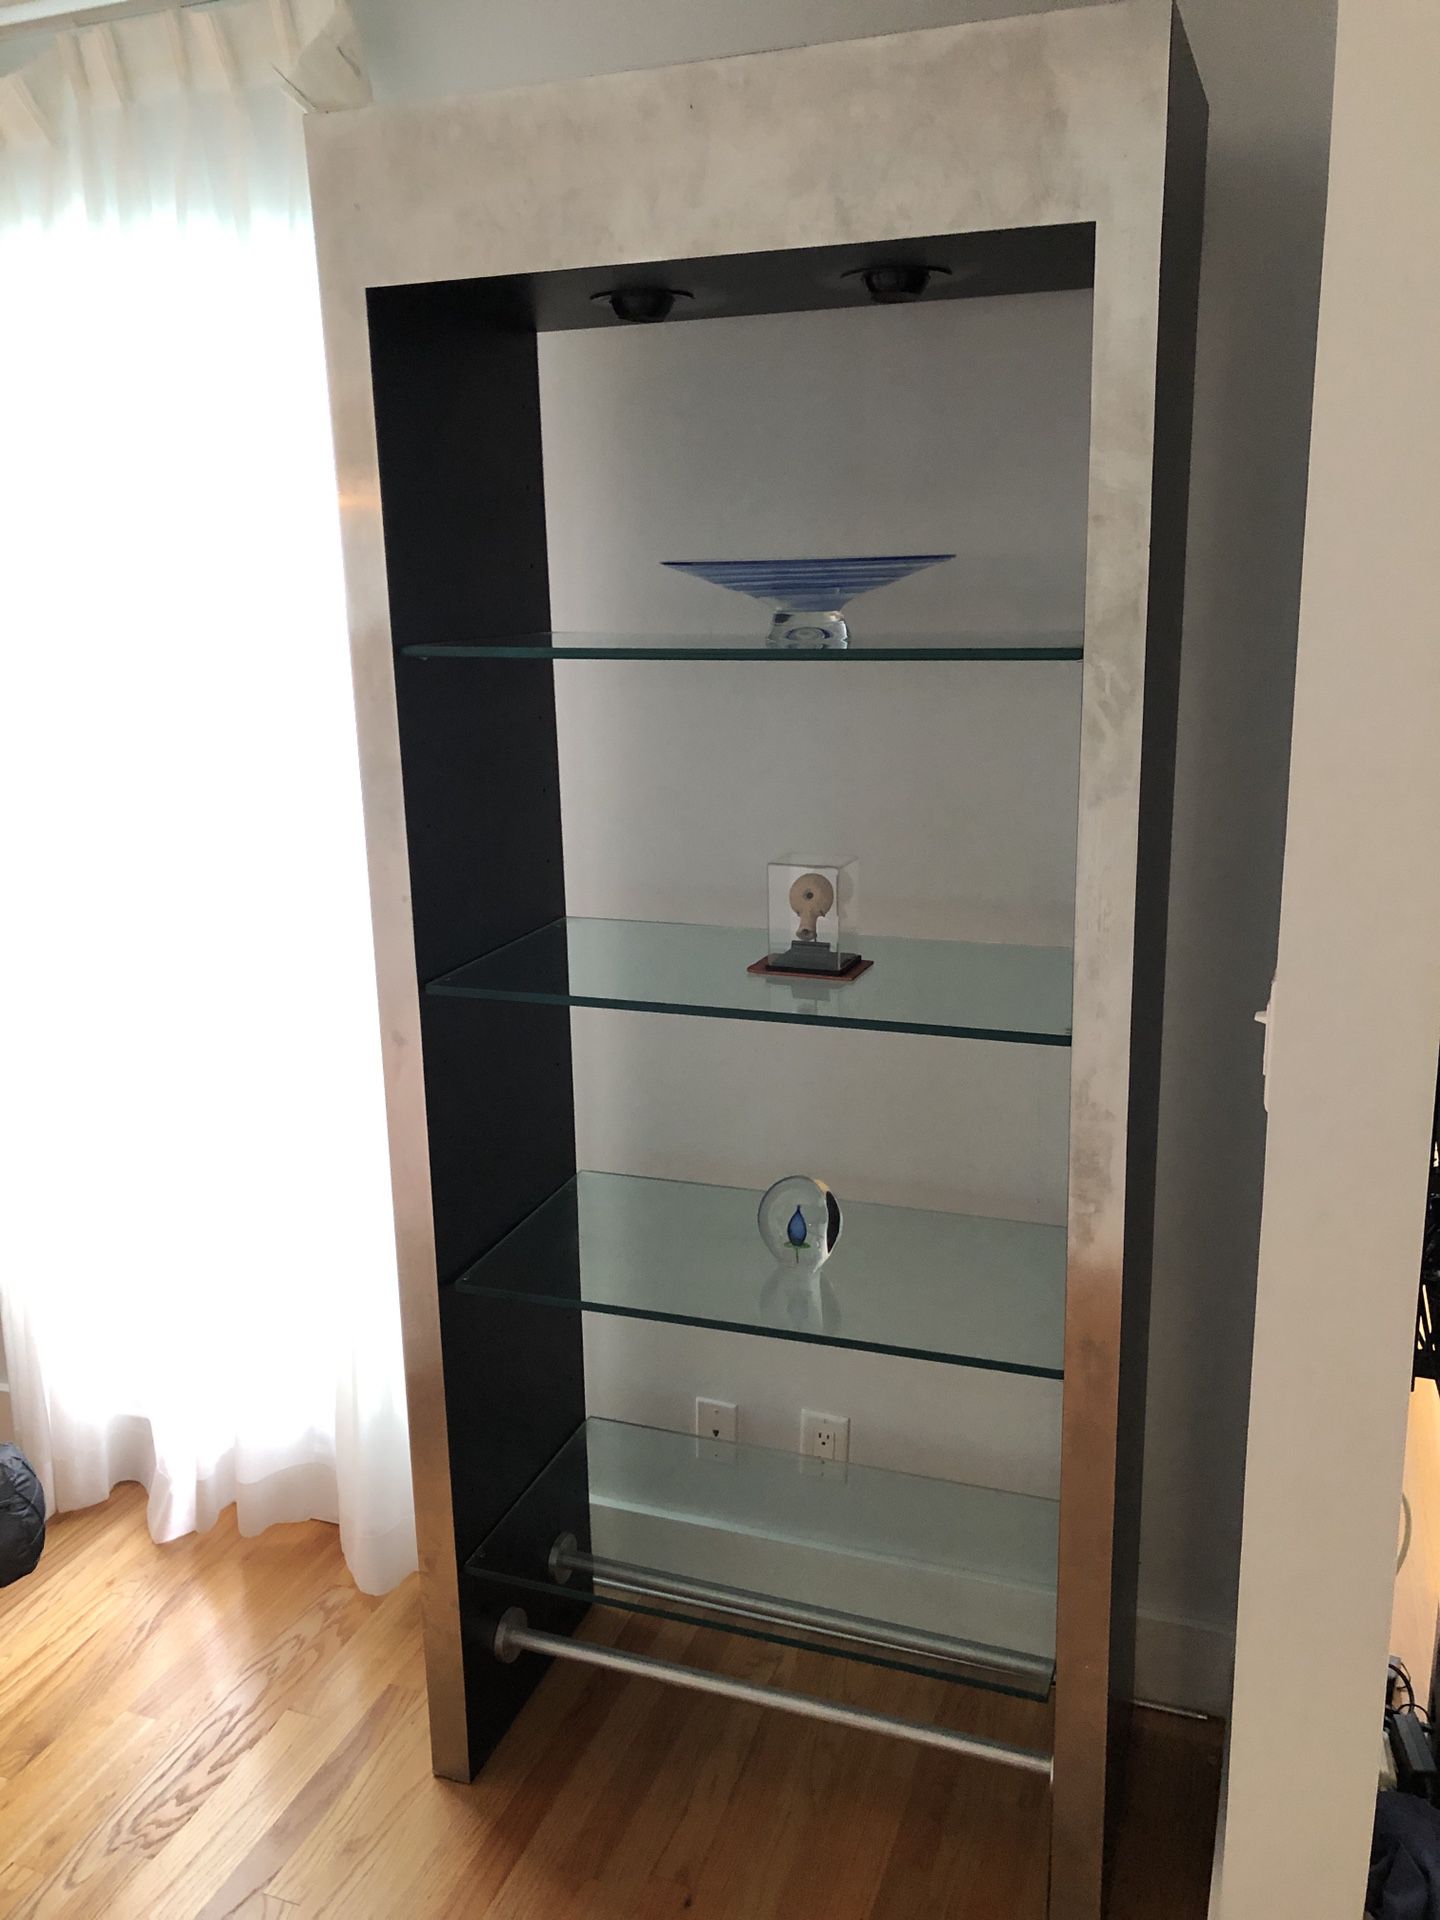 A modern Display Case For Business Or Homes